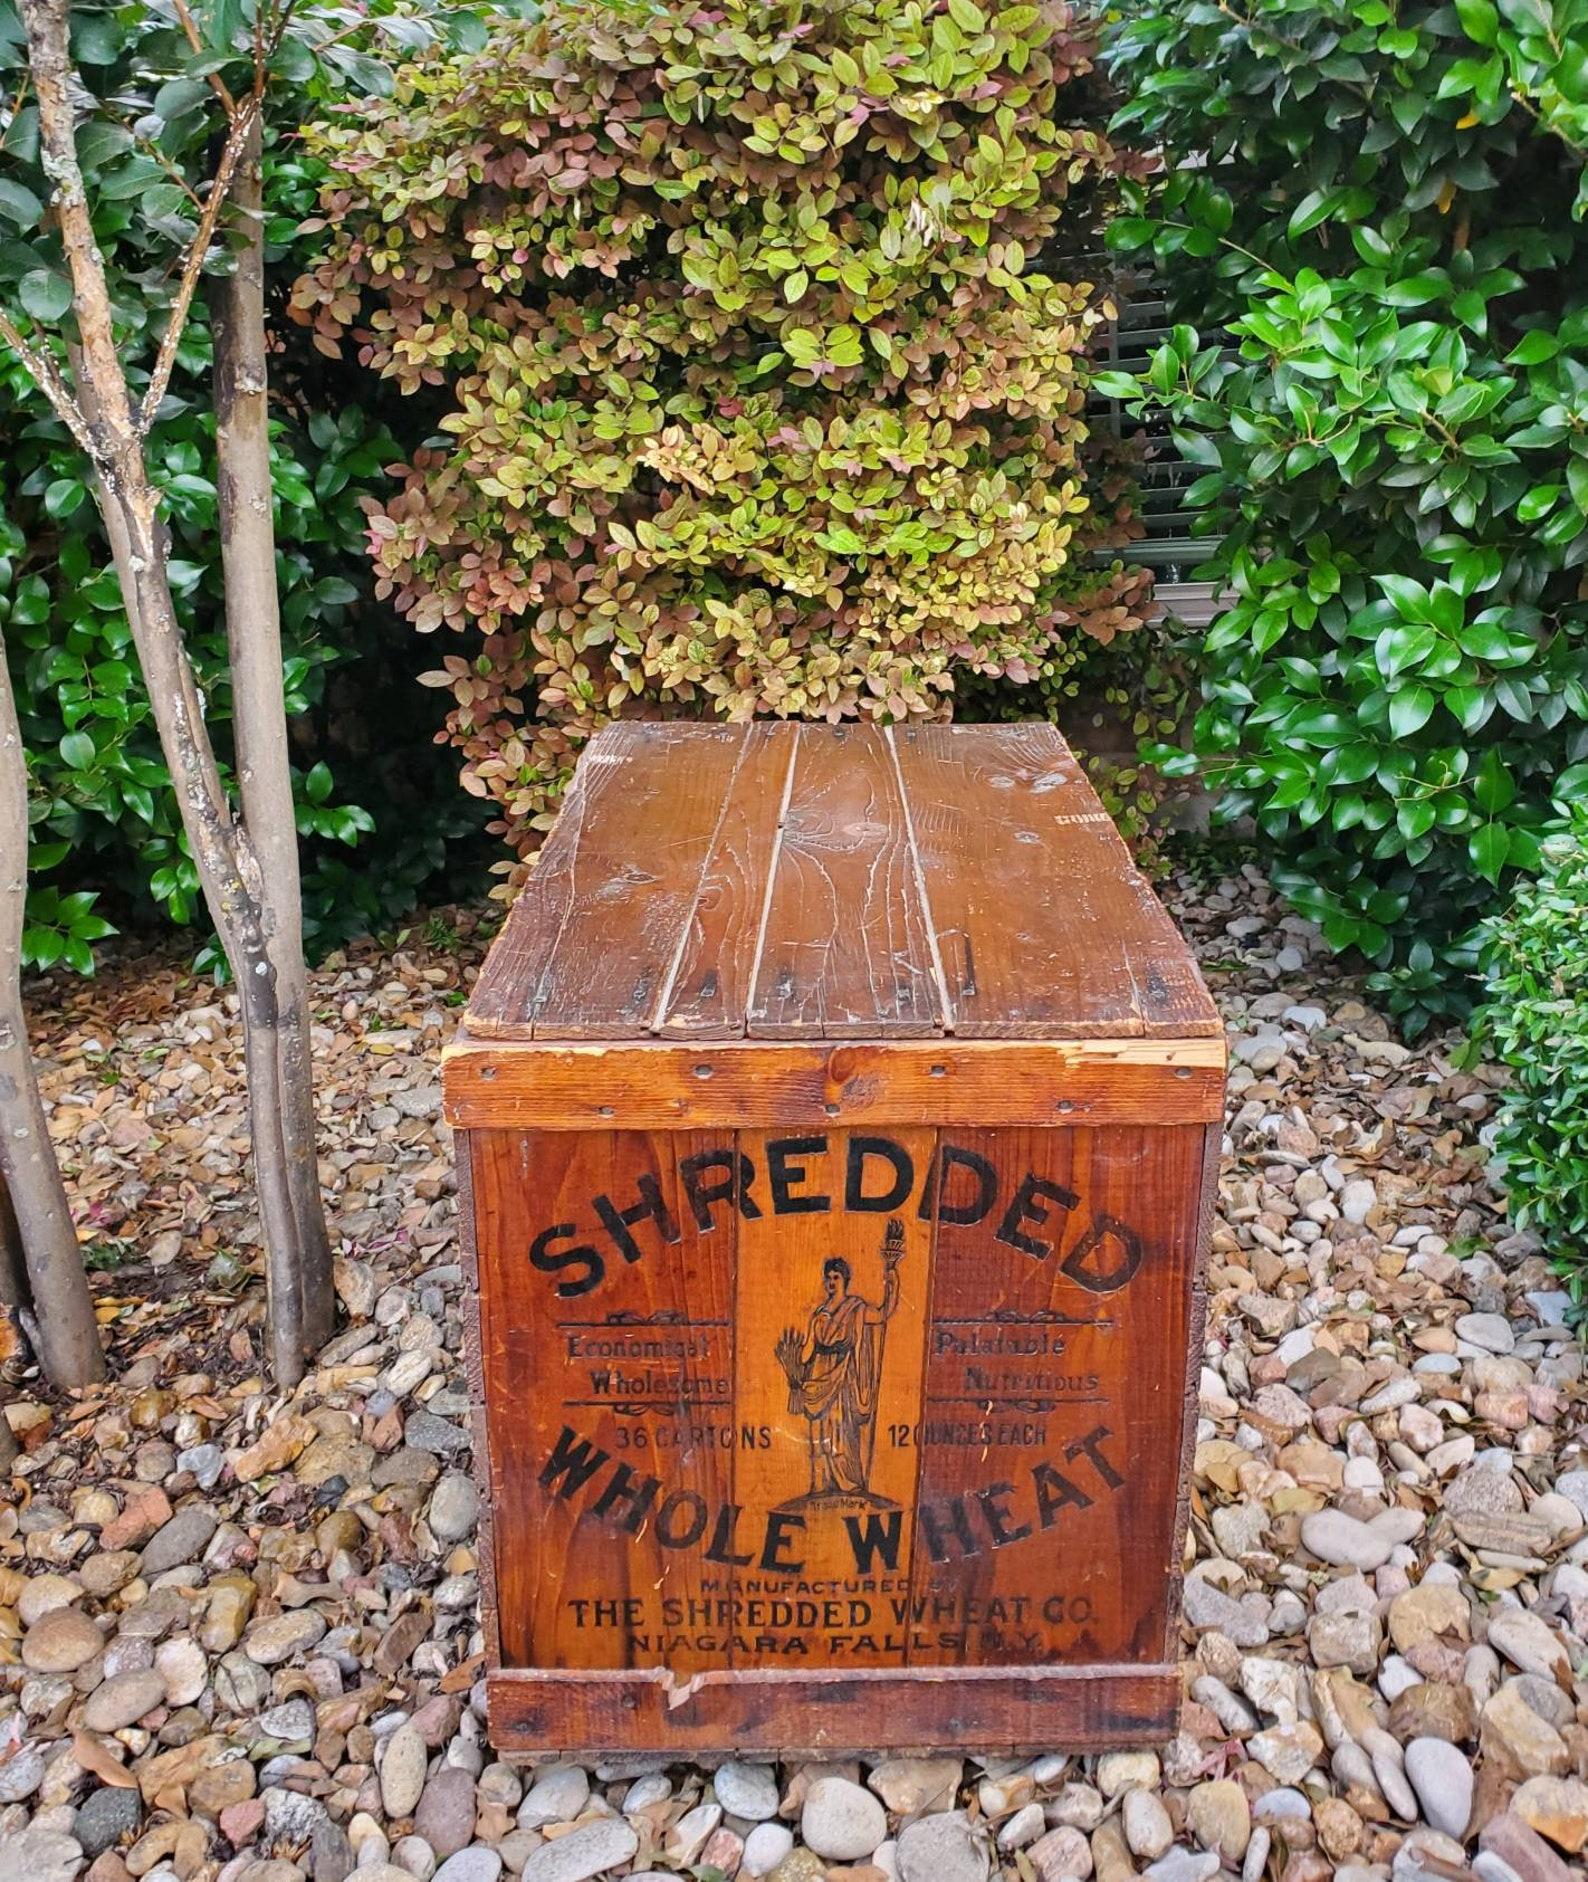 An exceptional piece of industrial Americana folk art from the early 20th century, the Shredded whole wheat wooden box crate with lid, stamped with advertisement, having rich antique wood tone and warm rustic patina. Good craftsmanship. Circa